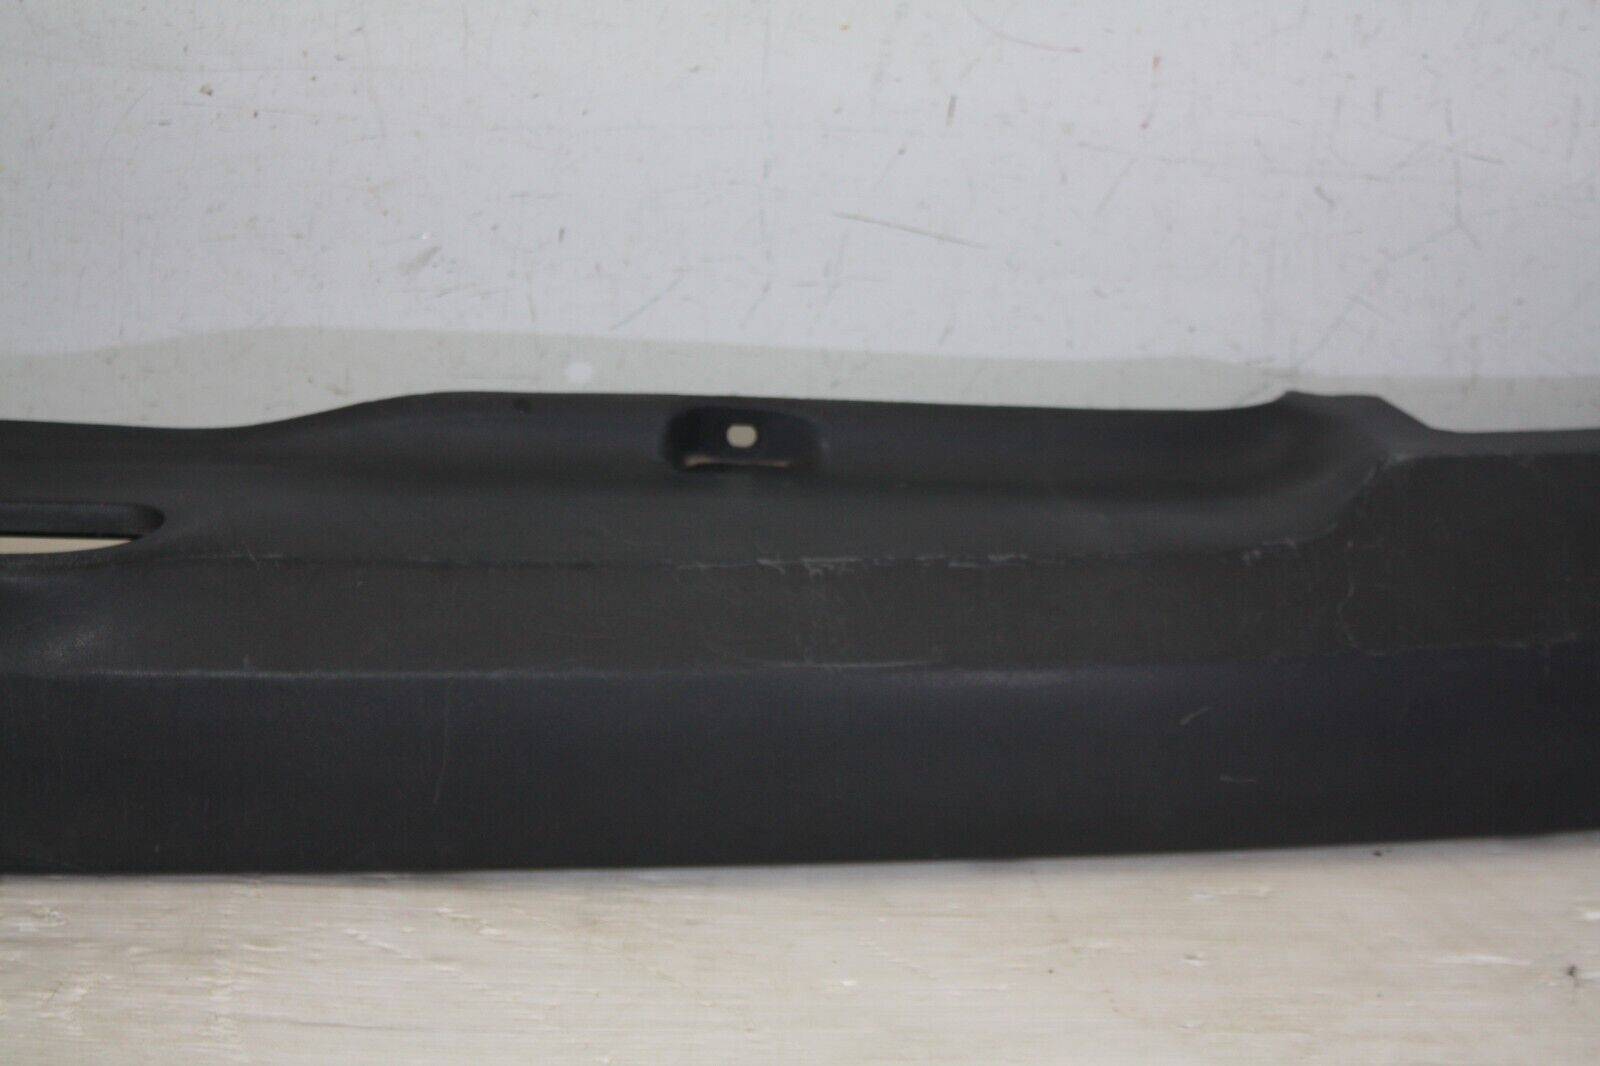 Renault-Clio-Rear-Bumper-Upper-Section-2001-TO-2005-8200083217-Genuine-176093485781-3